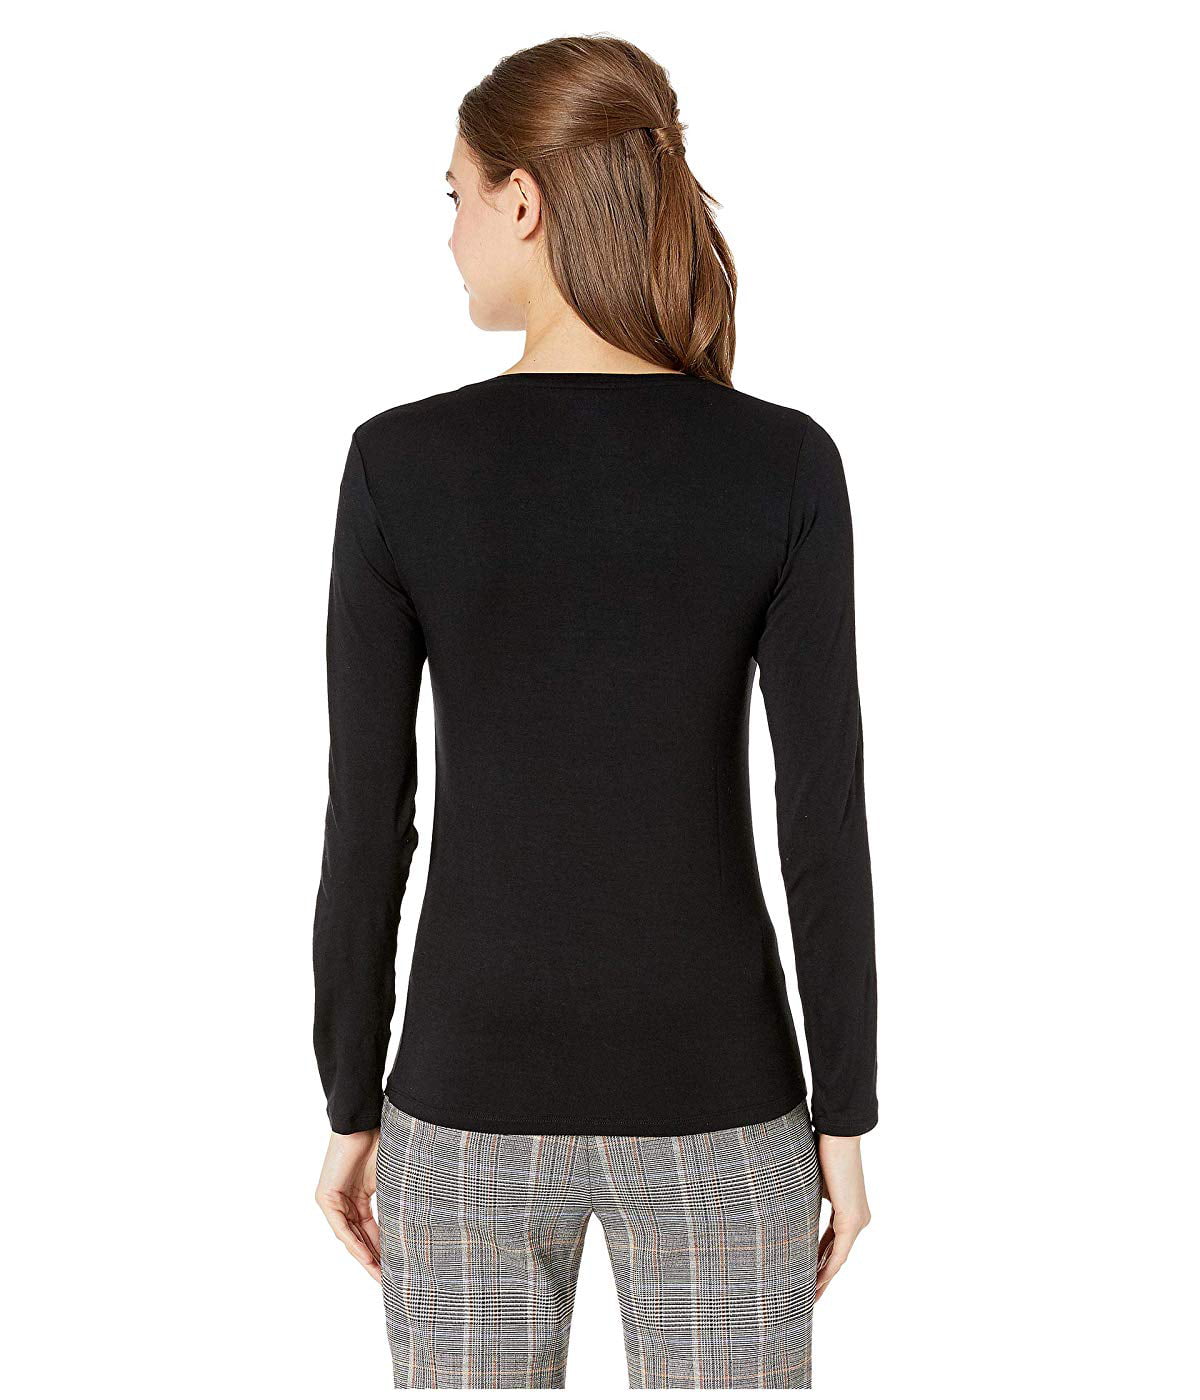 Majestic Filatures Womens Soft Touch Flat-Edge Long Sleeve Crew Neck 